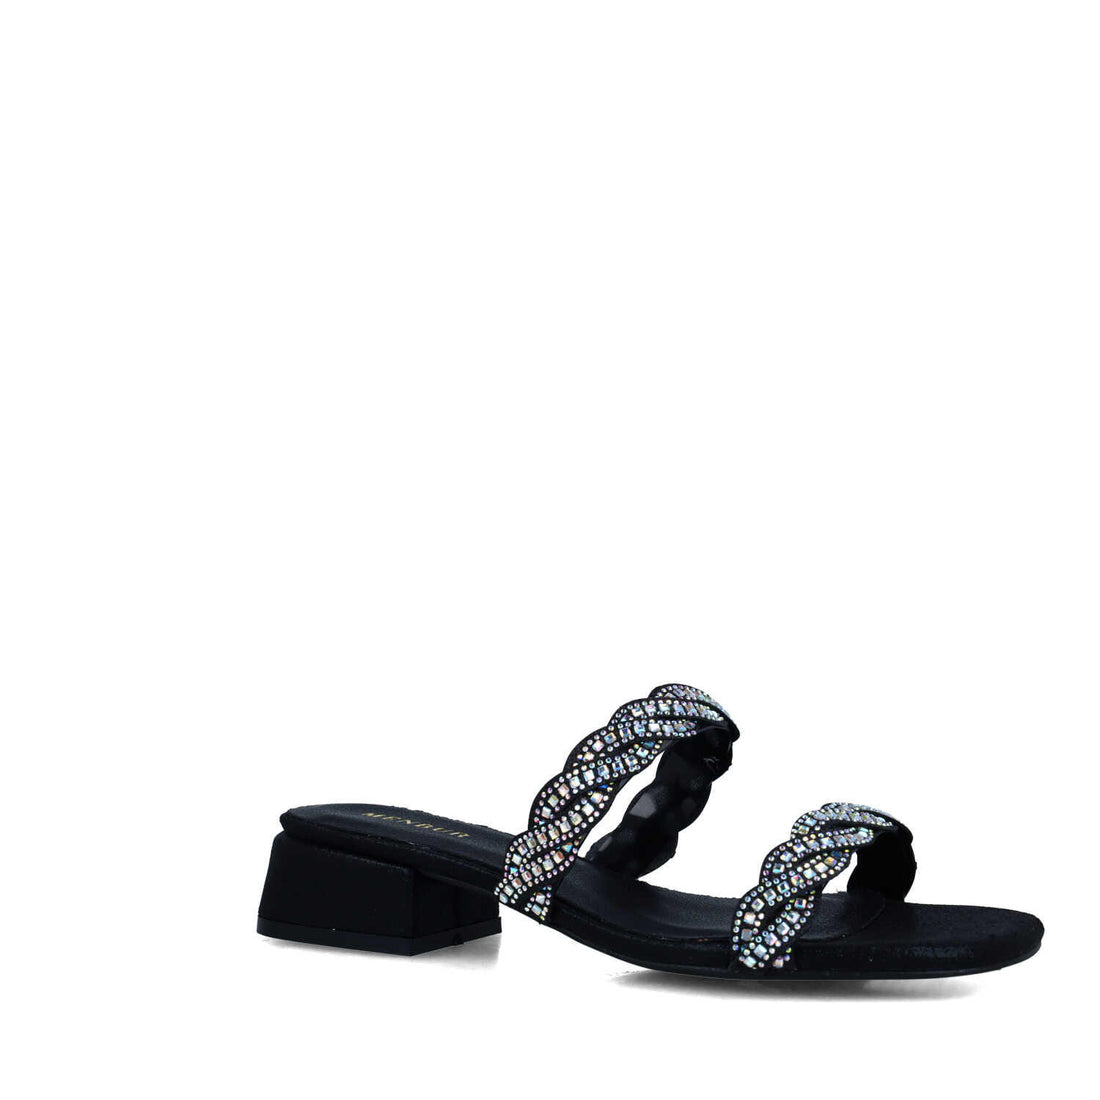 Black Slippers With Heel_24927_01_02